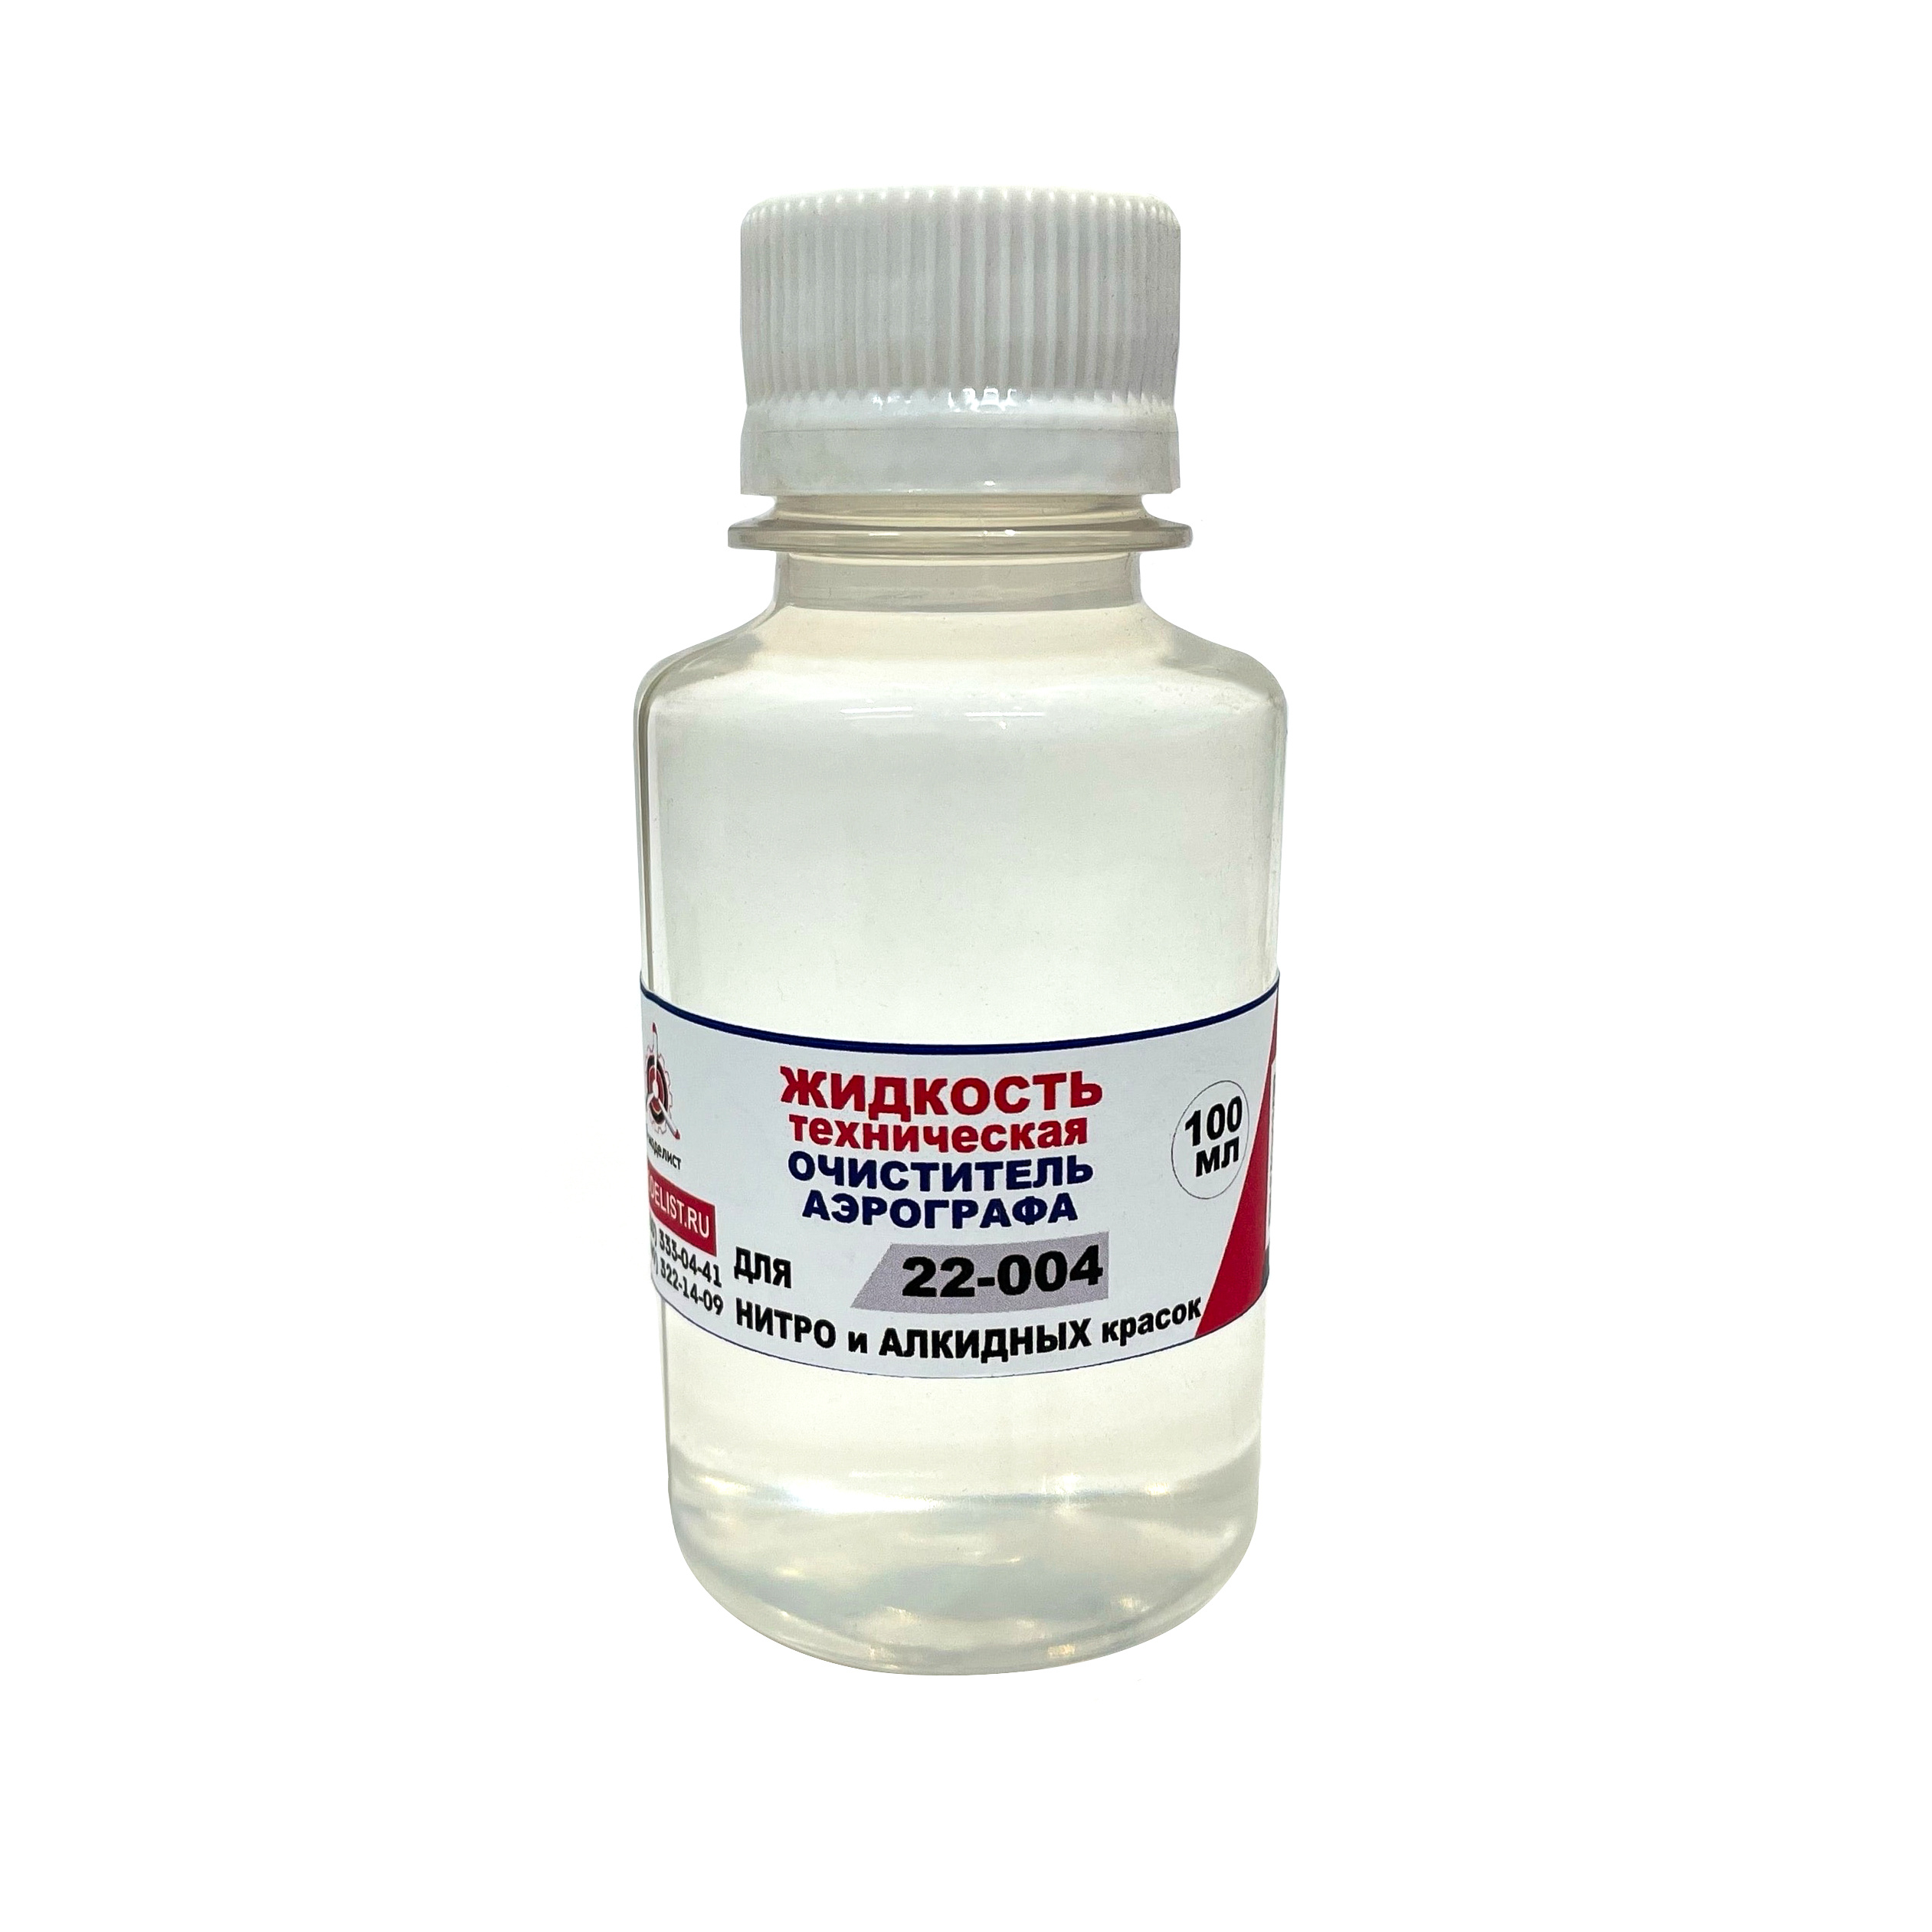 22-004 Imodelist Airbrush cleaner. For nitro and alkyd paints. 100 ml